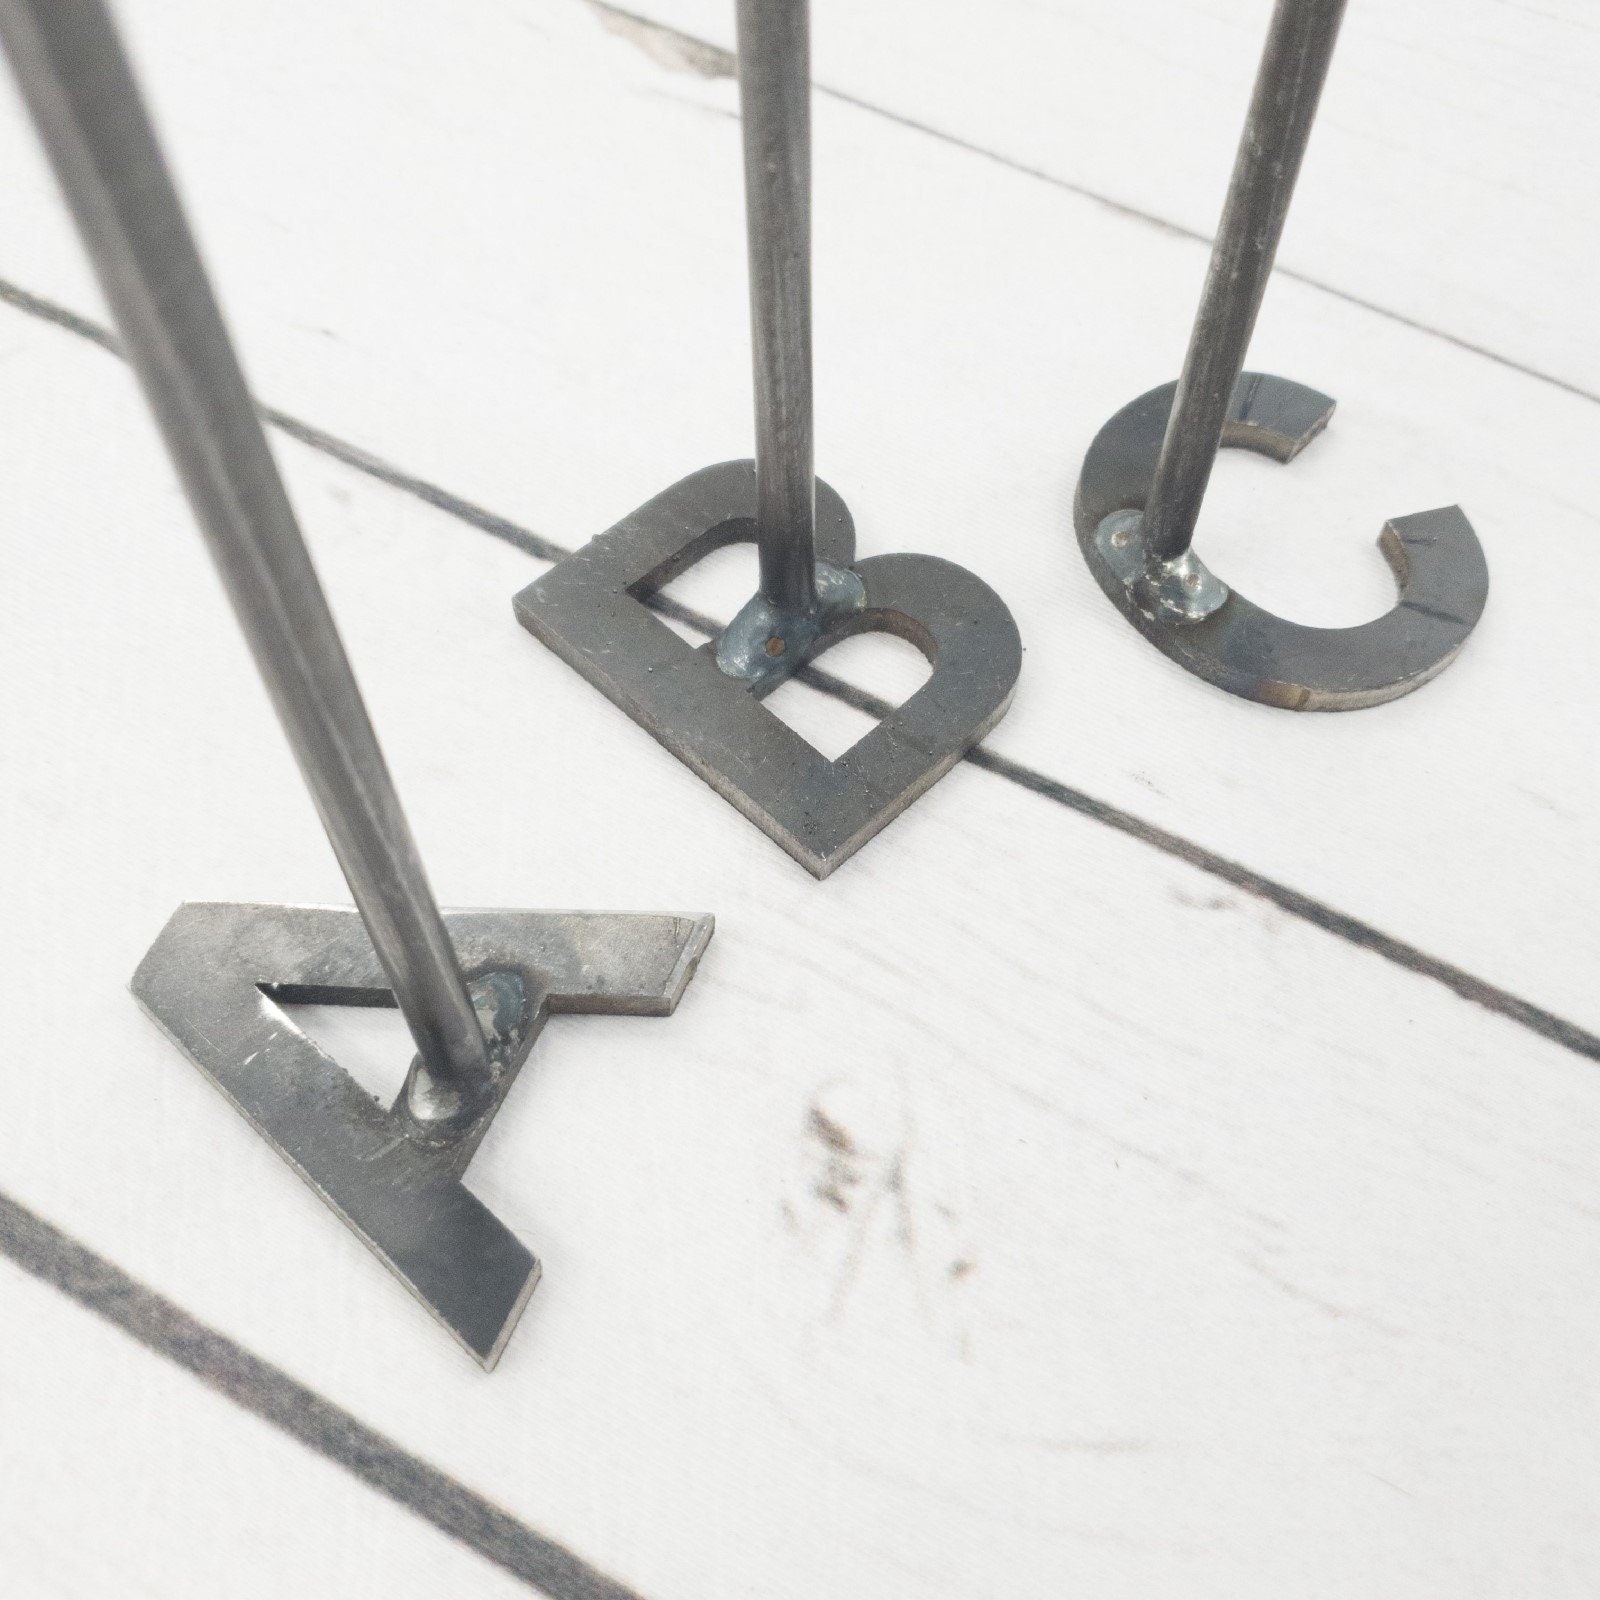 Branding Irons/Grilling Wood Burning Western Alphabet Made in The Usa Steel 10 Length 2 Wide Handcrafted Farmhouse /Food"